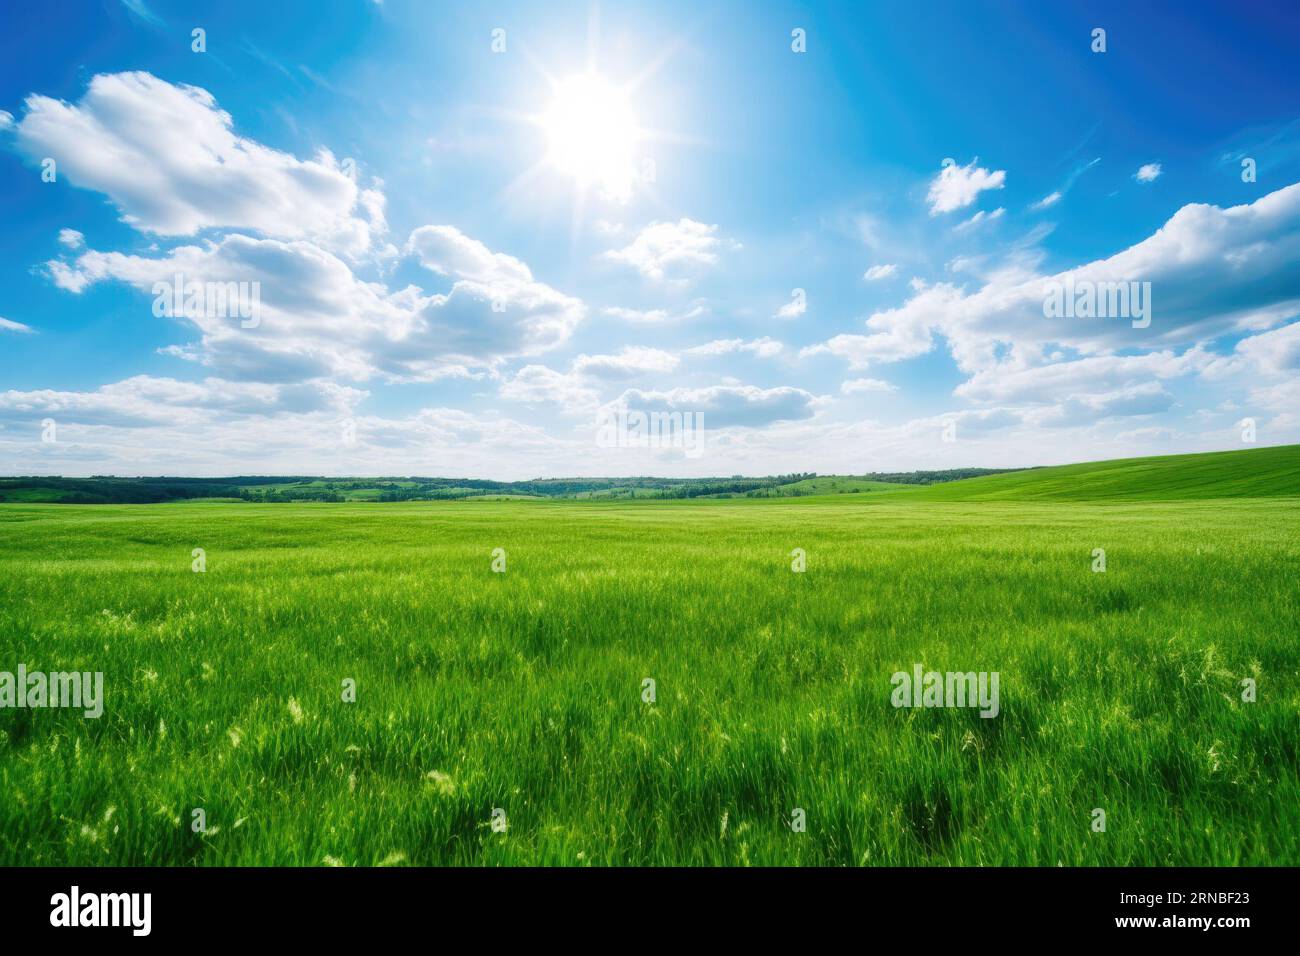 Green grass field and blue sky nature background Stock Photo